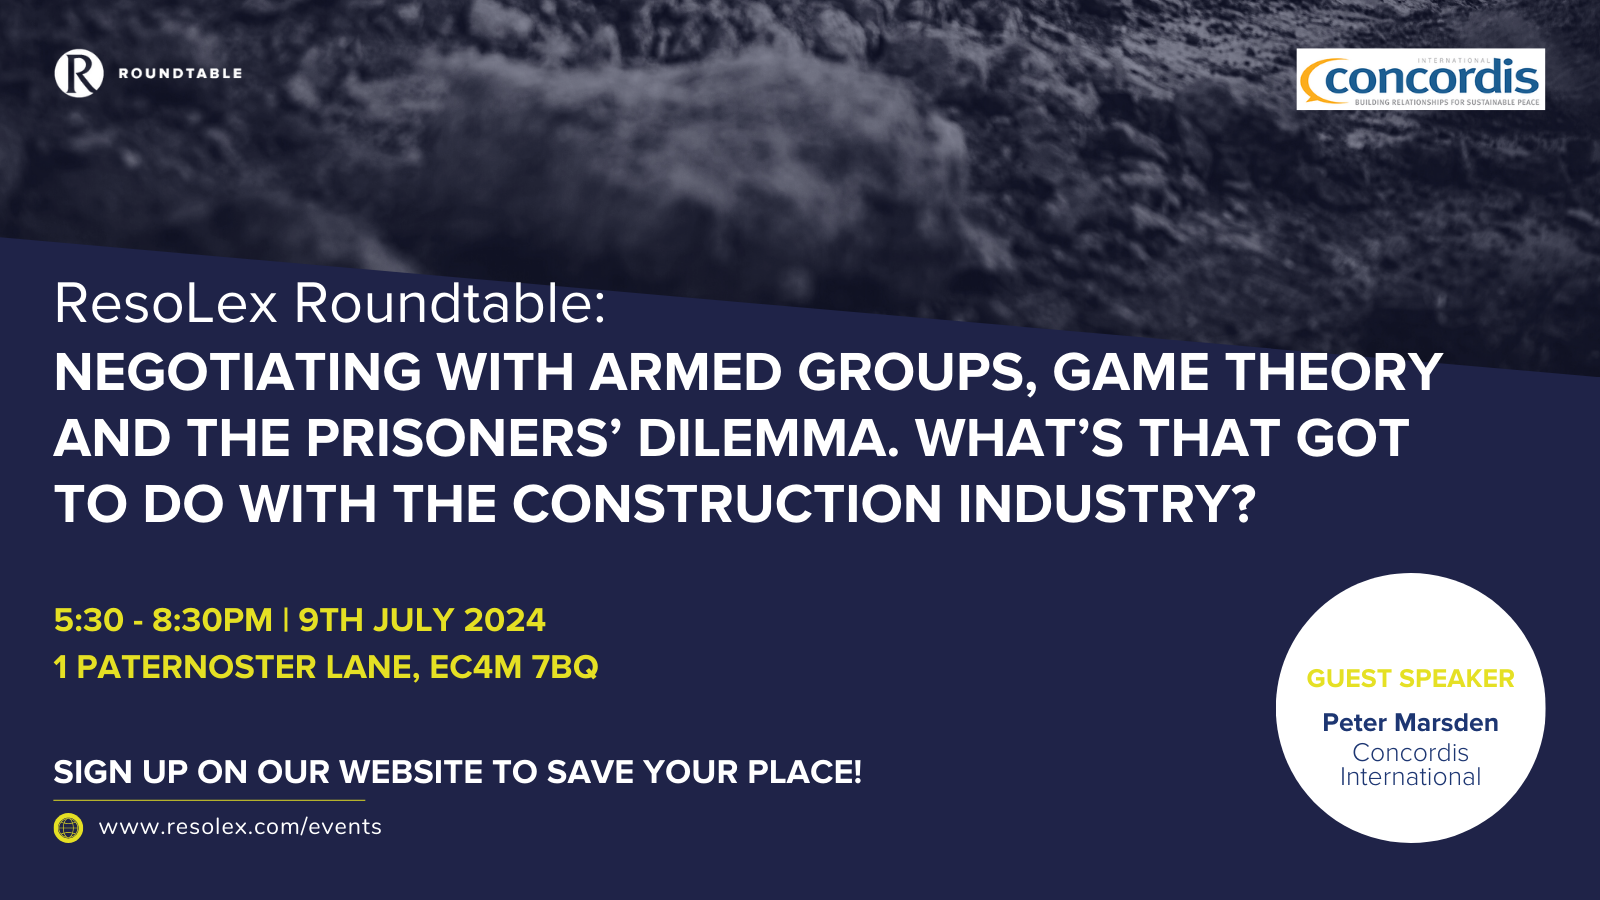 ResoLex Roundtable: Negotiating with armed groups, game theory and the prisoners’ dilemma. What’s that got to do with the construction industry?